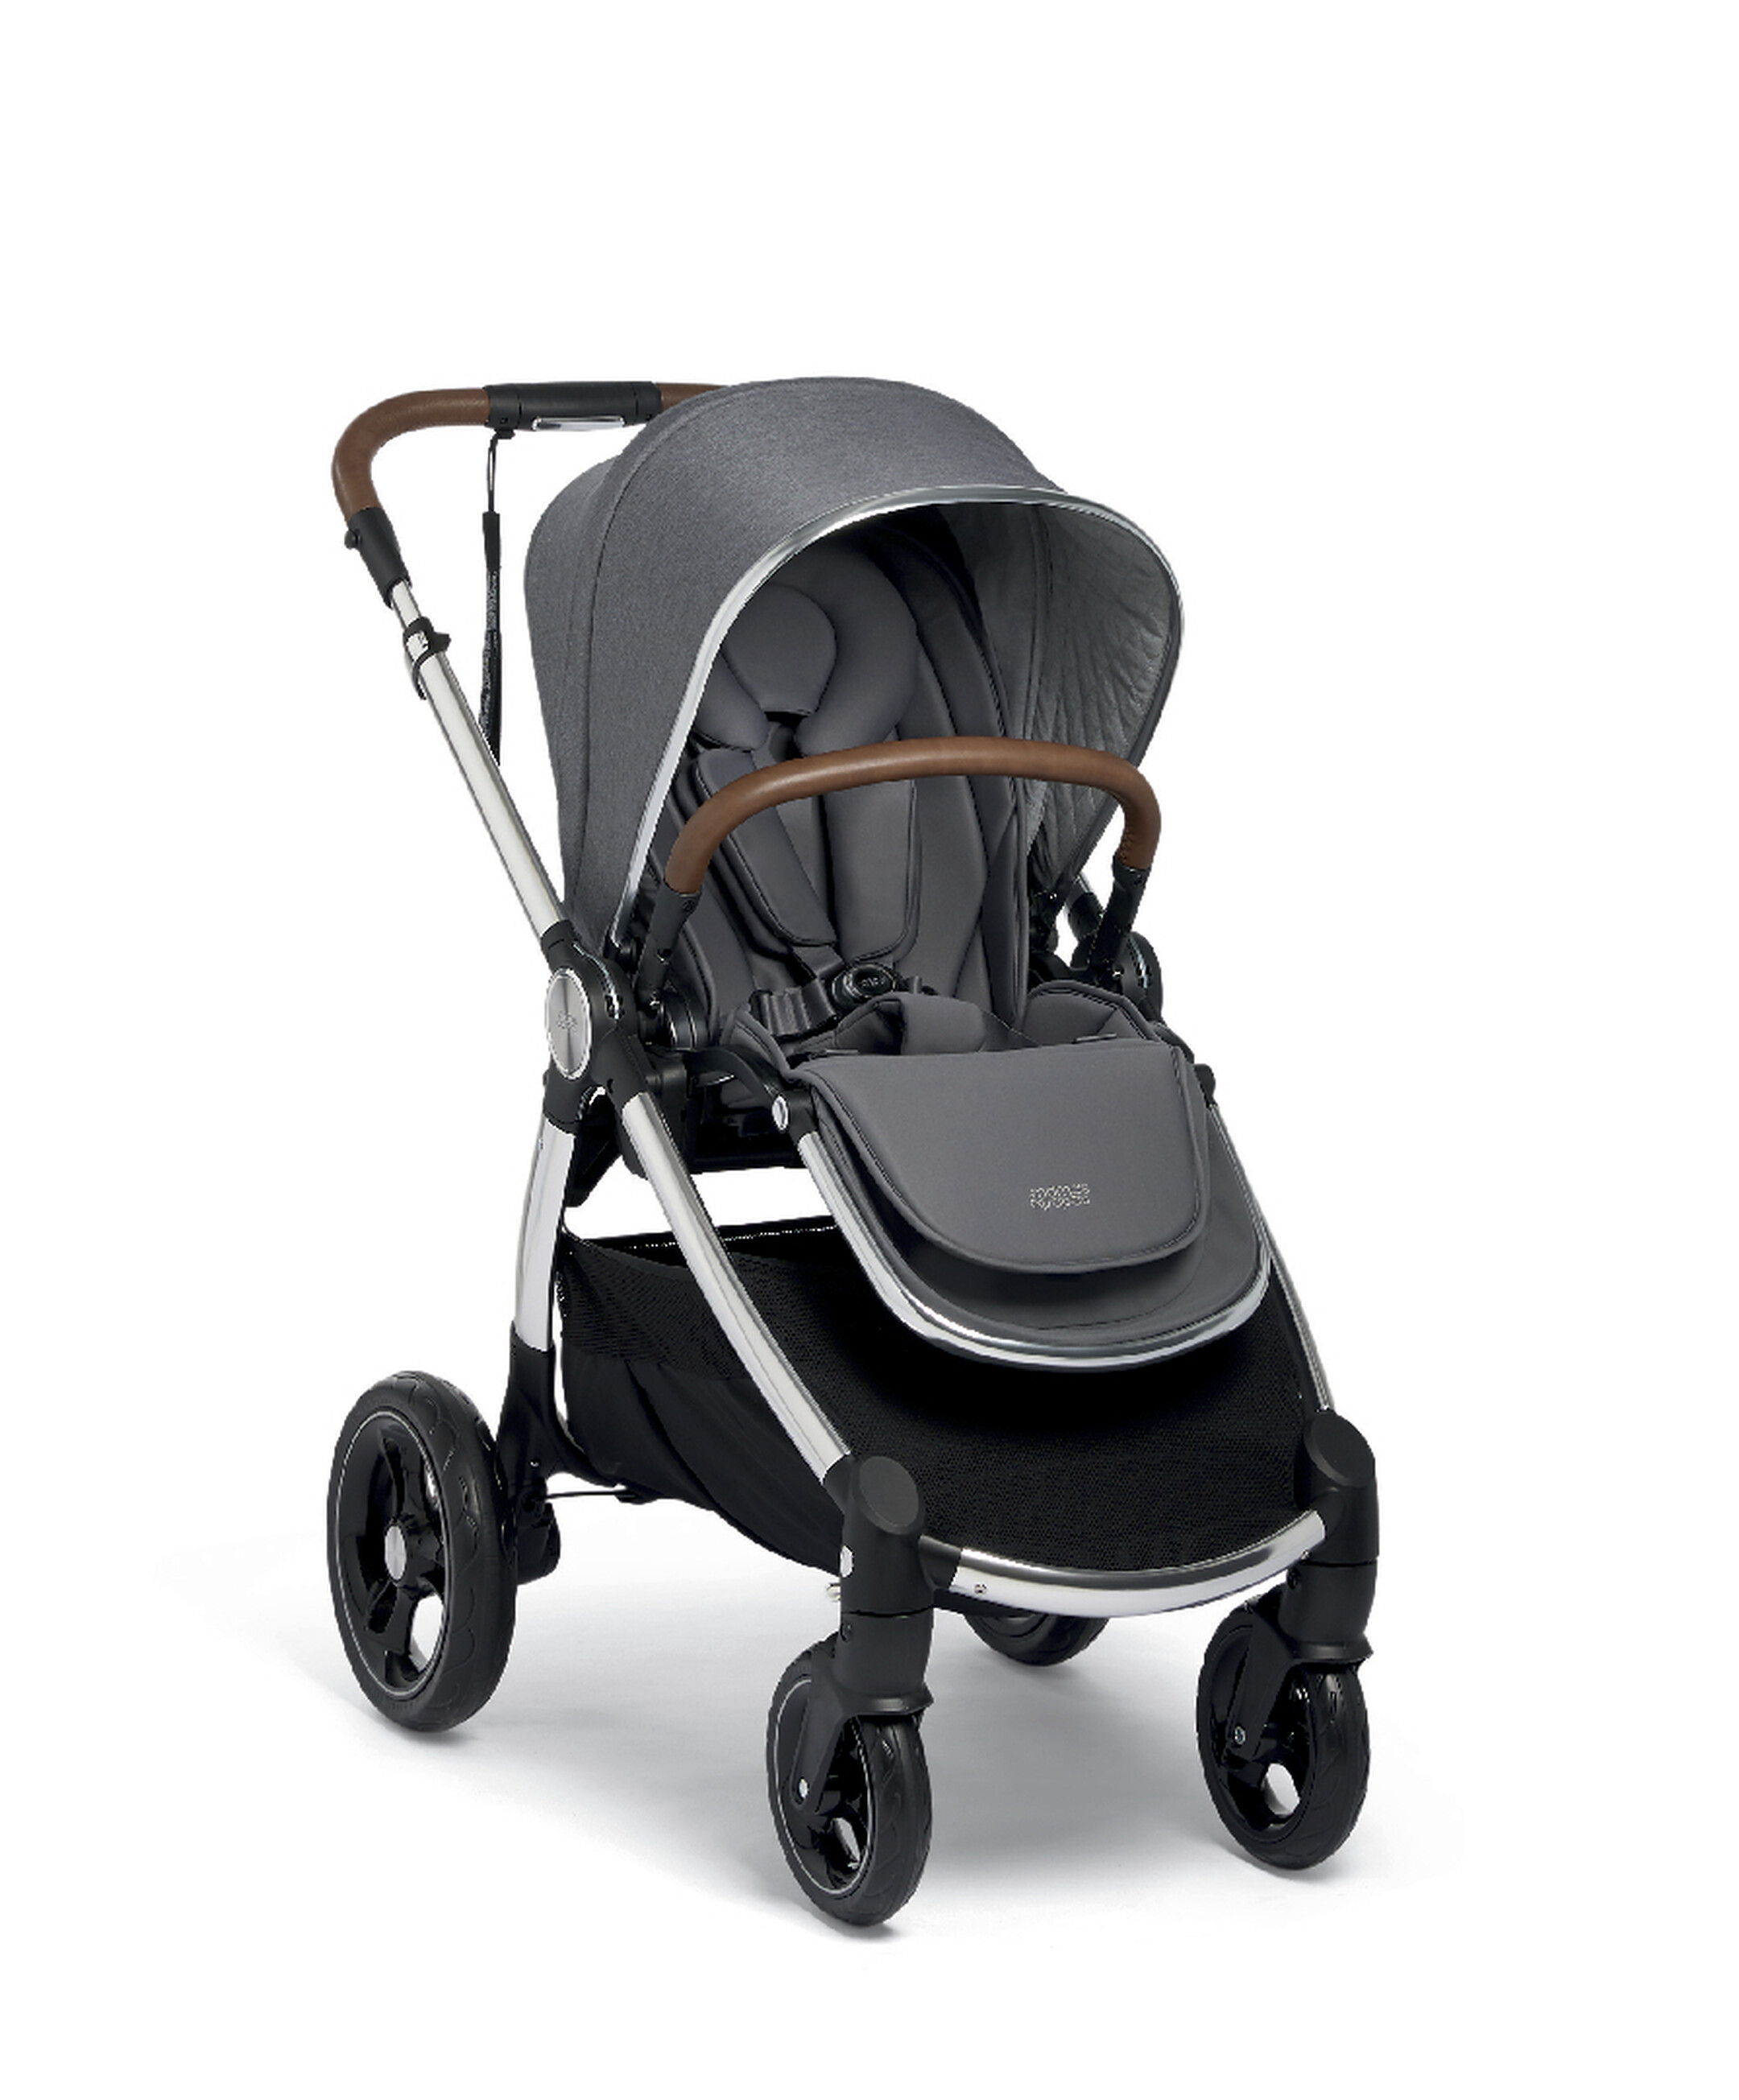 Save 53% when you buy the Okaro gray stroller from Mamas and Papas offer